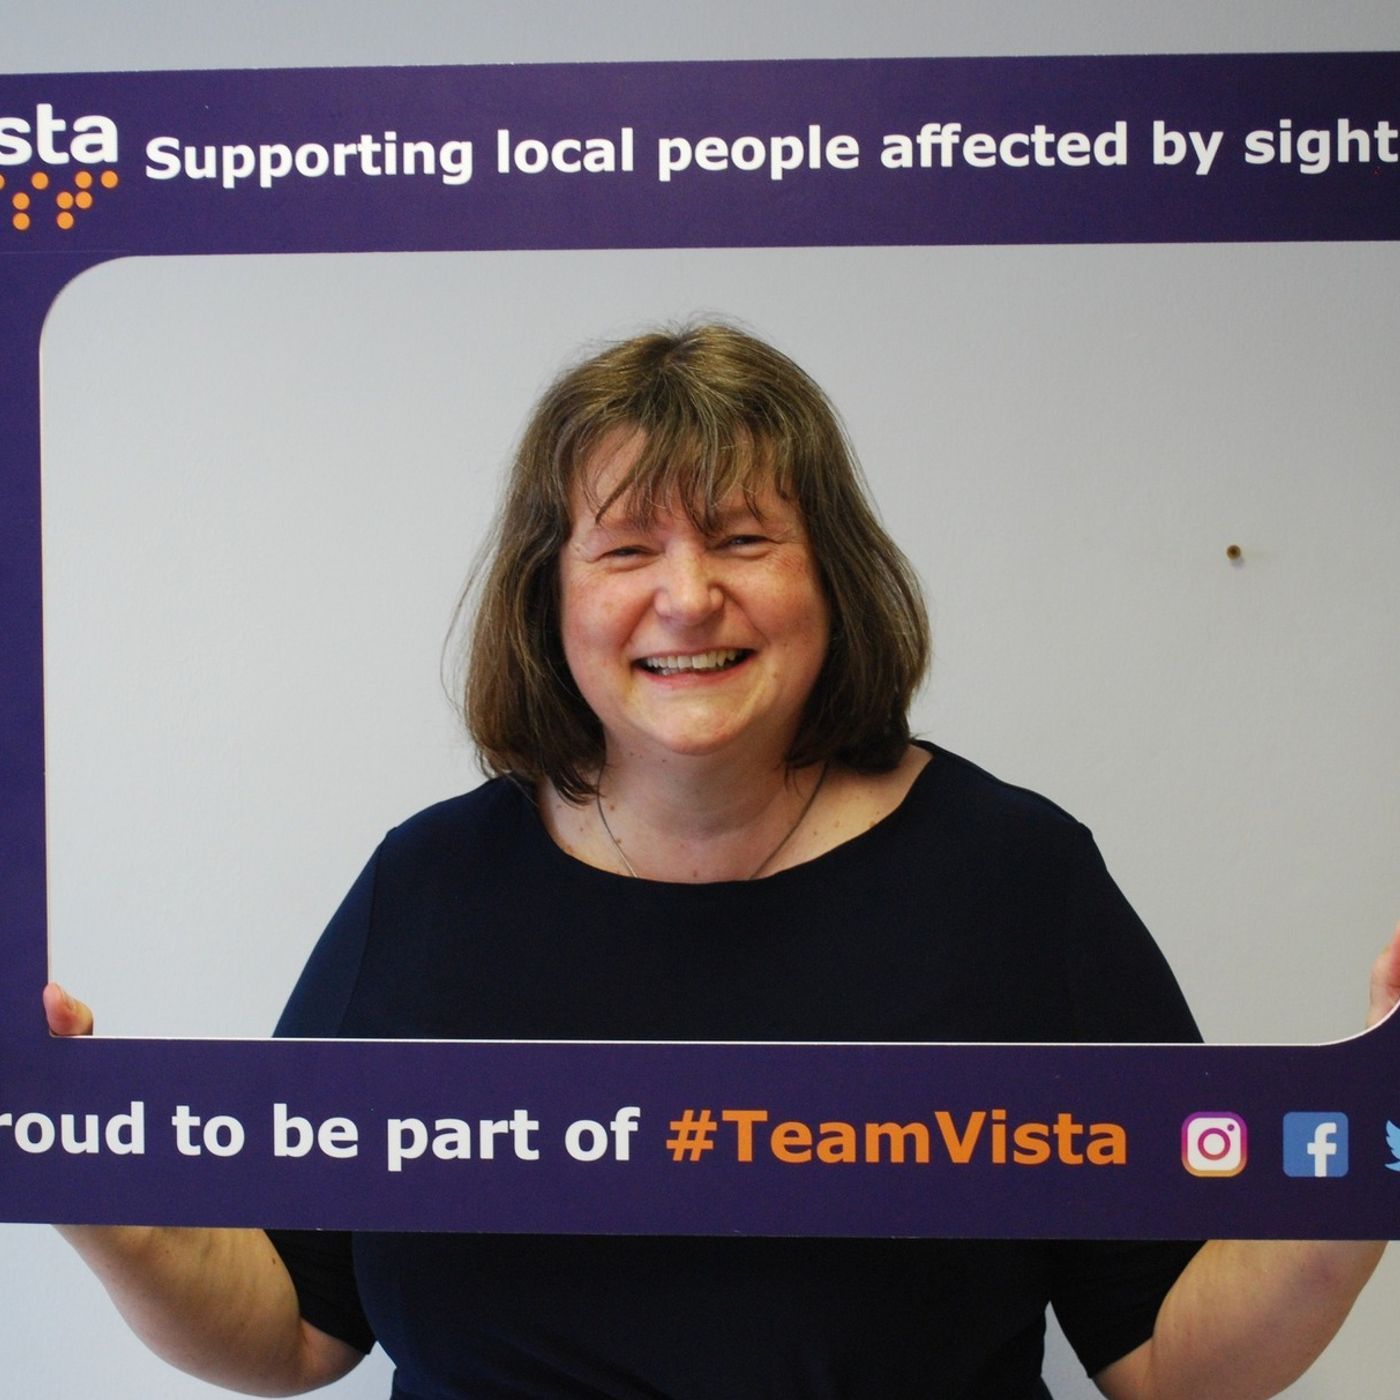 302: A message from Susan Hoath, CEO at Vista - Volunteers' Week 2022